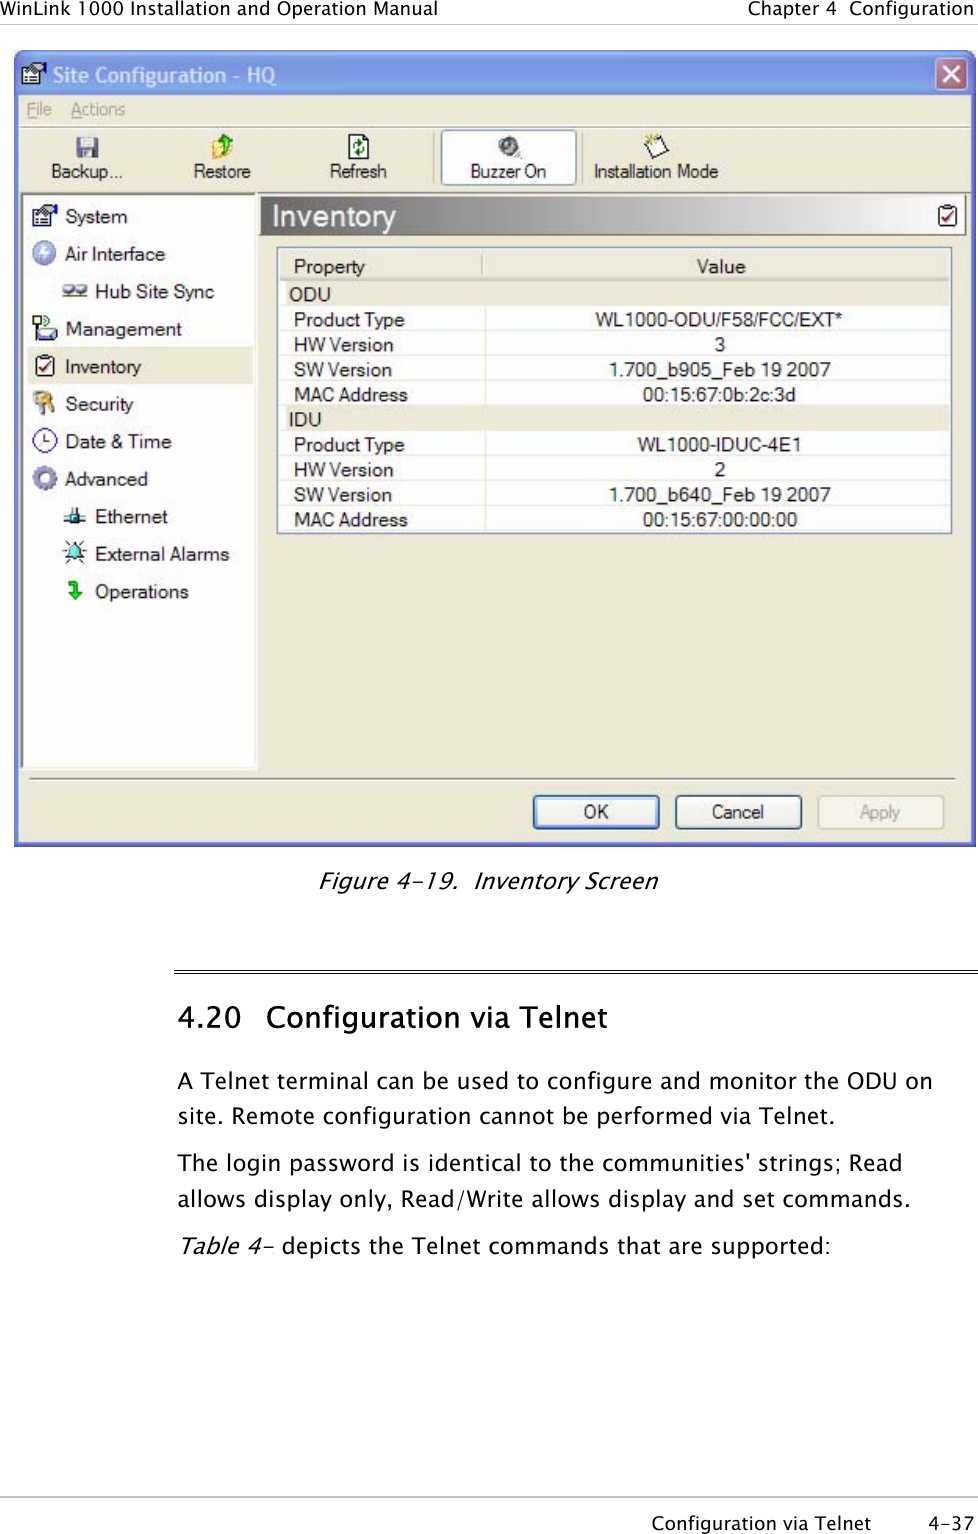 WinLink 1000 Installation and Operation Manual  Chapter  4  Configuration  Figure  4-19.  Inventory Screen 4.20 Configuration via Telnet A Telnet terminal can be used to configure and monitor the ODU on site. Remote configuration cannot be performed via Telnet.  The login password is identical to the communities&apos; strings; Read allows display only, Read/Write allows display and set commands. Table  4-3 depicts the Telnet commands that are supported:  Configuration via Telnet  4-37 